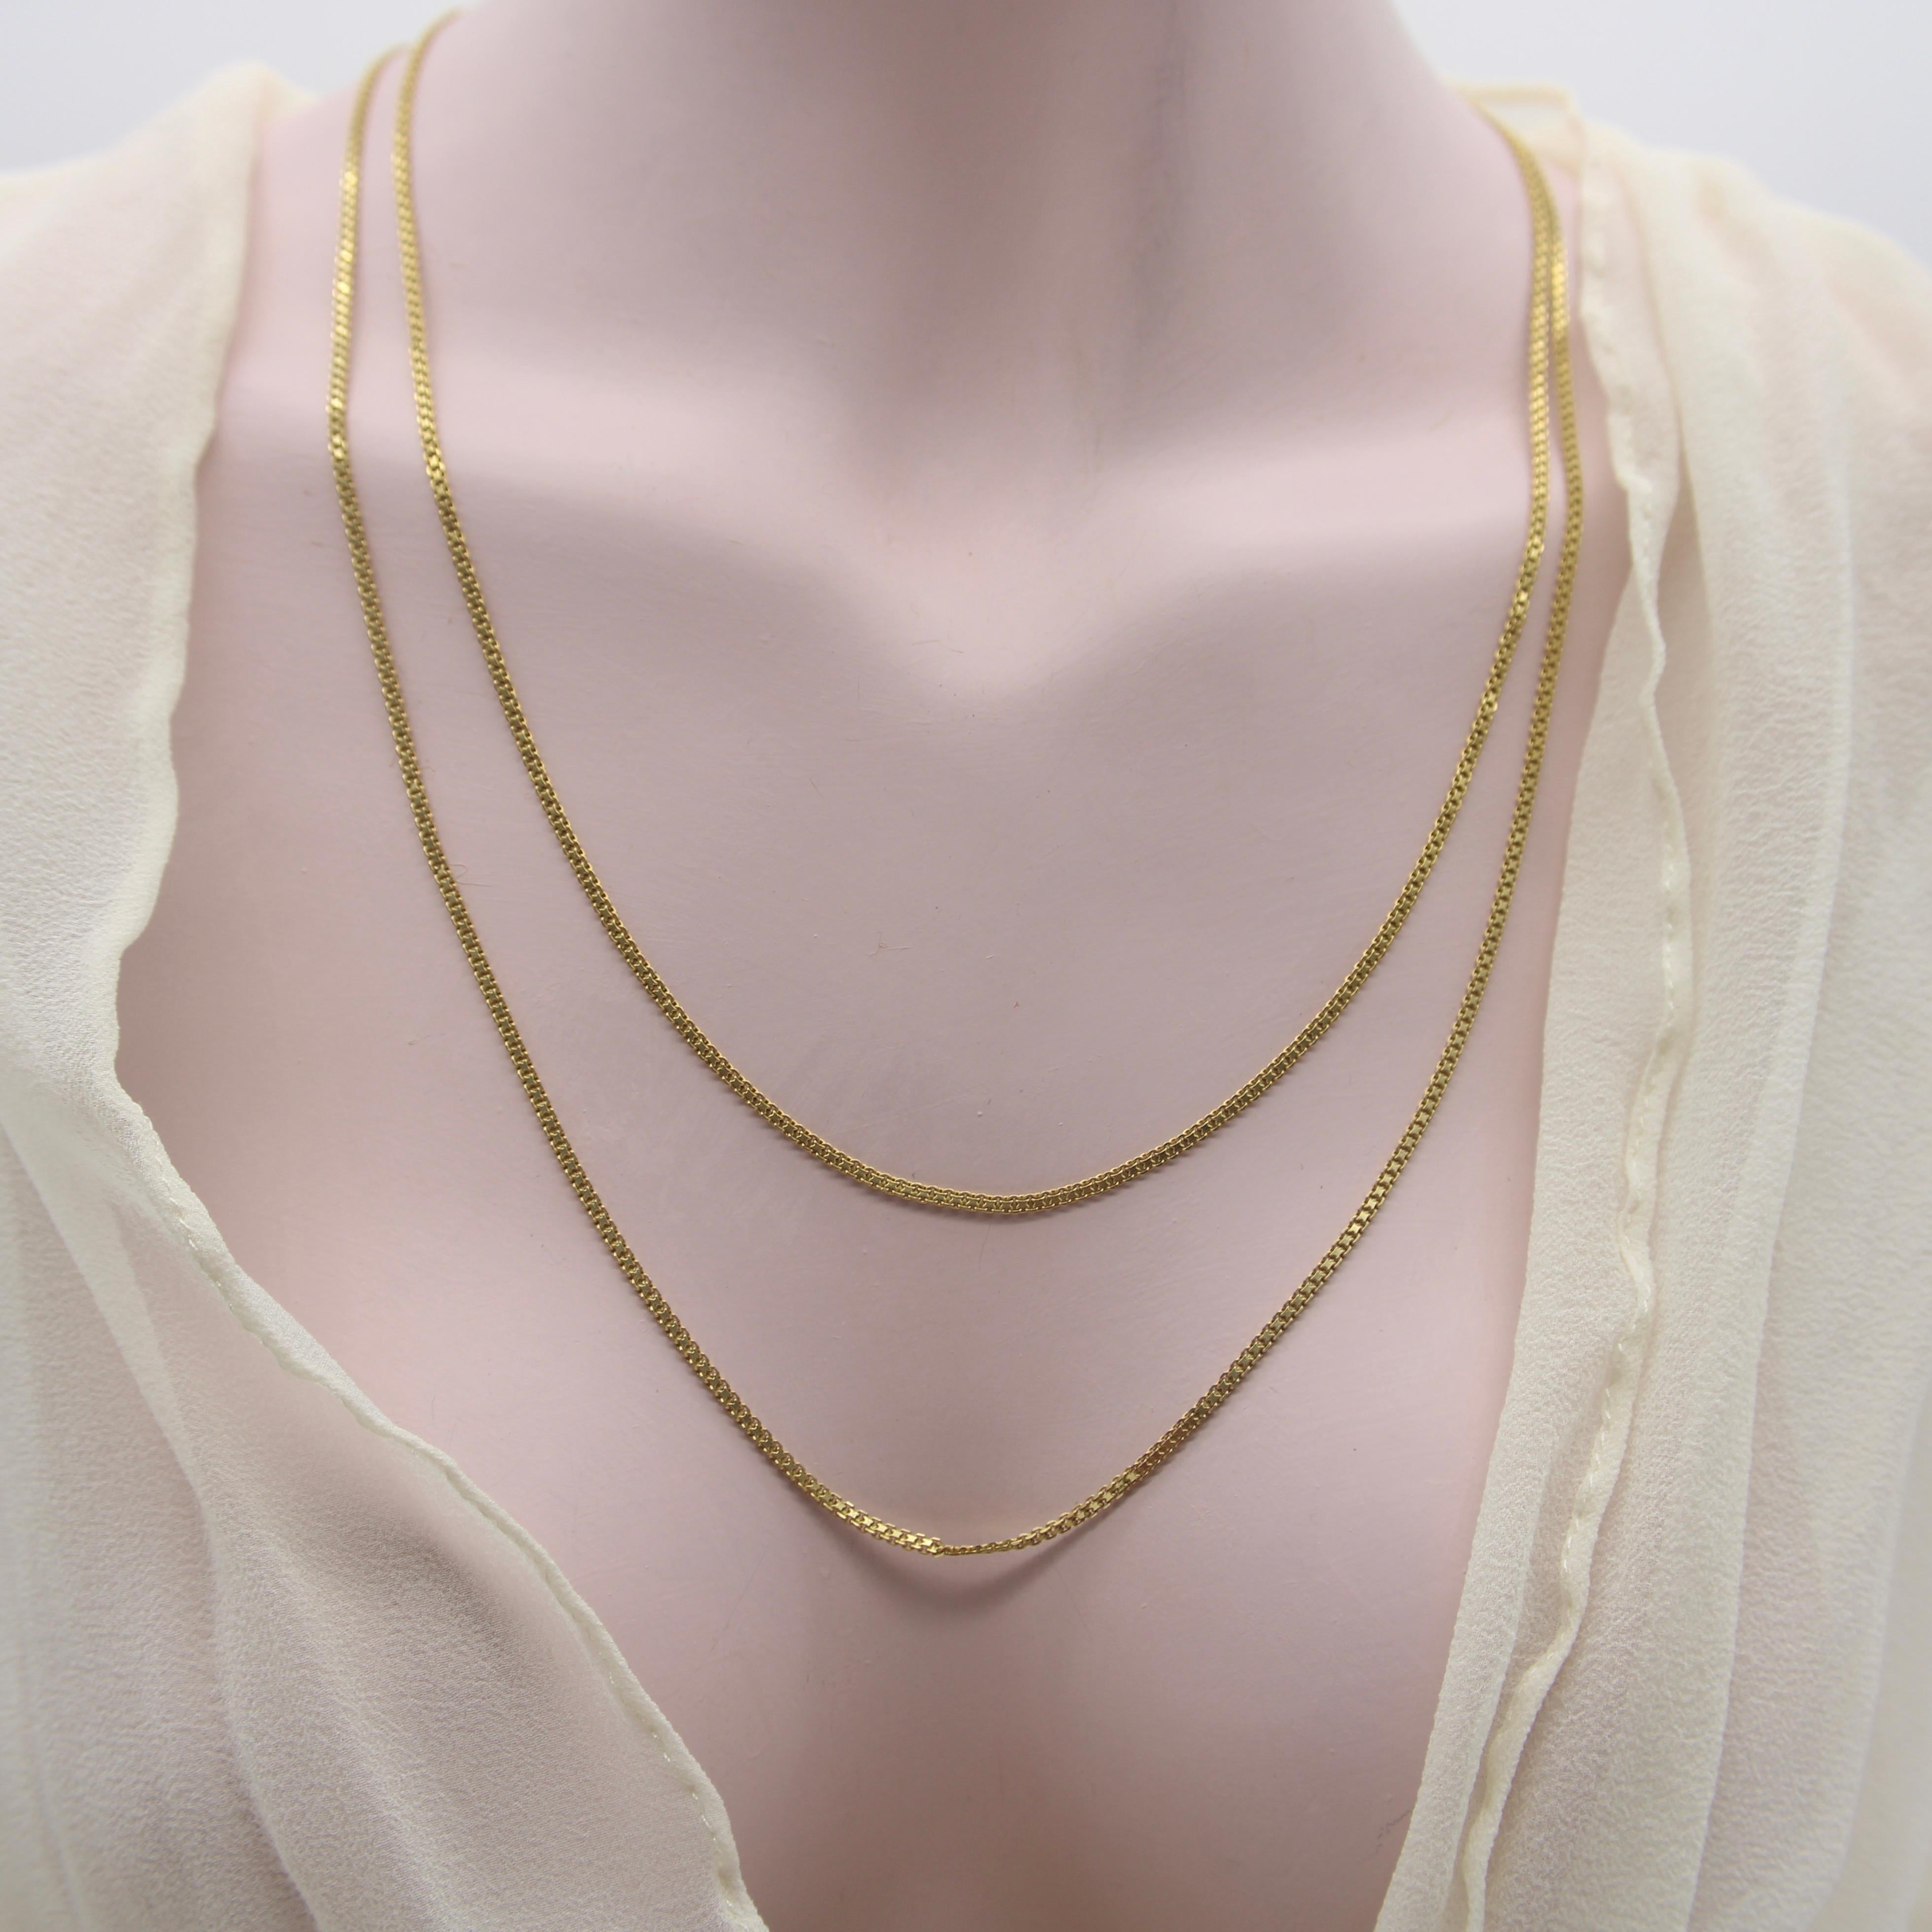 Women's or Men's Vintage 22K Gold Flattened Double-Linked Long 28” Chain Necklace For Sale